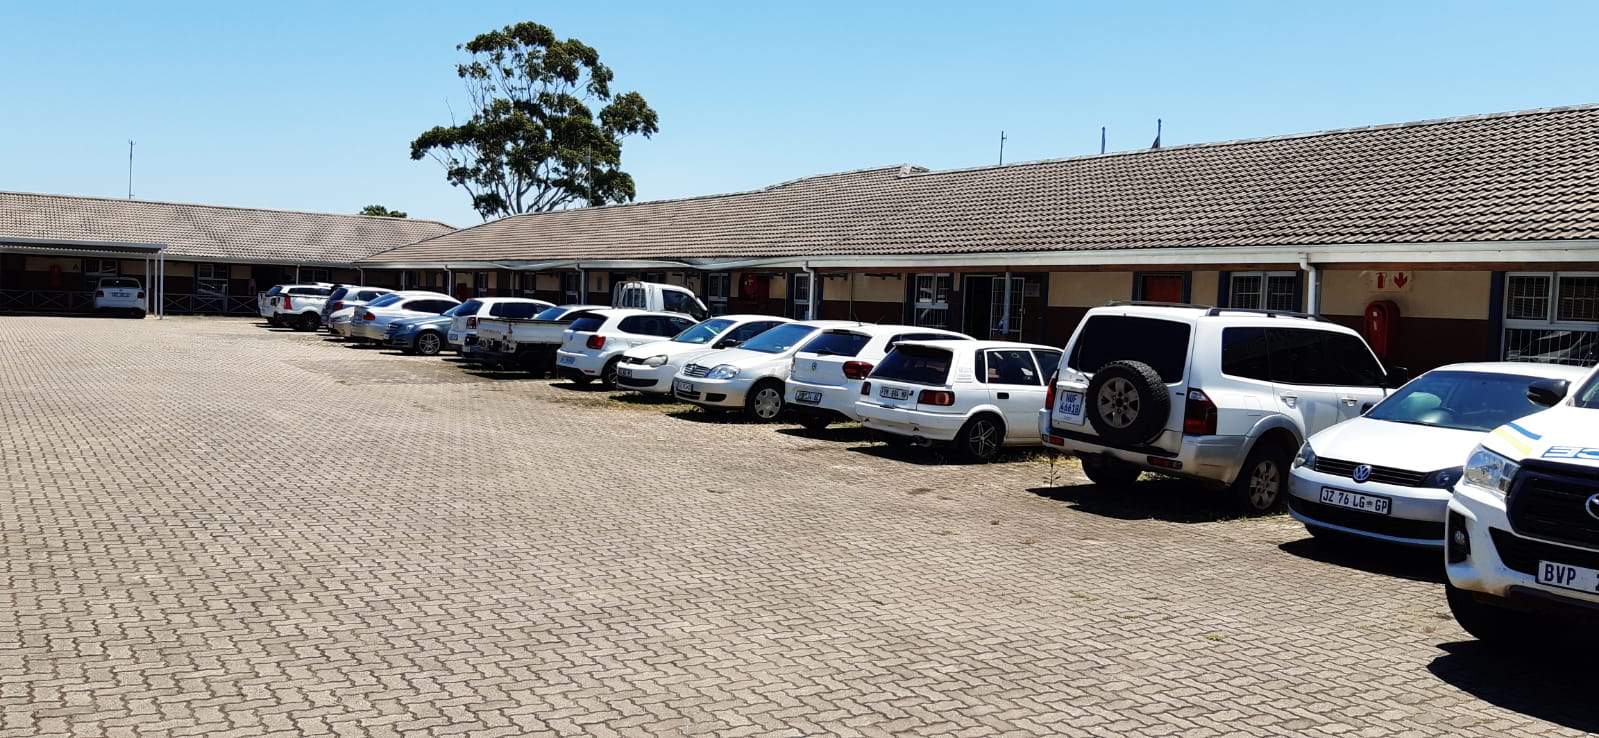 Oversights Reveal Kzn Saps Is On The Brink Of Collapse Kwazulu Natal